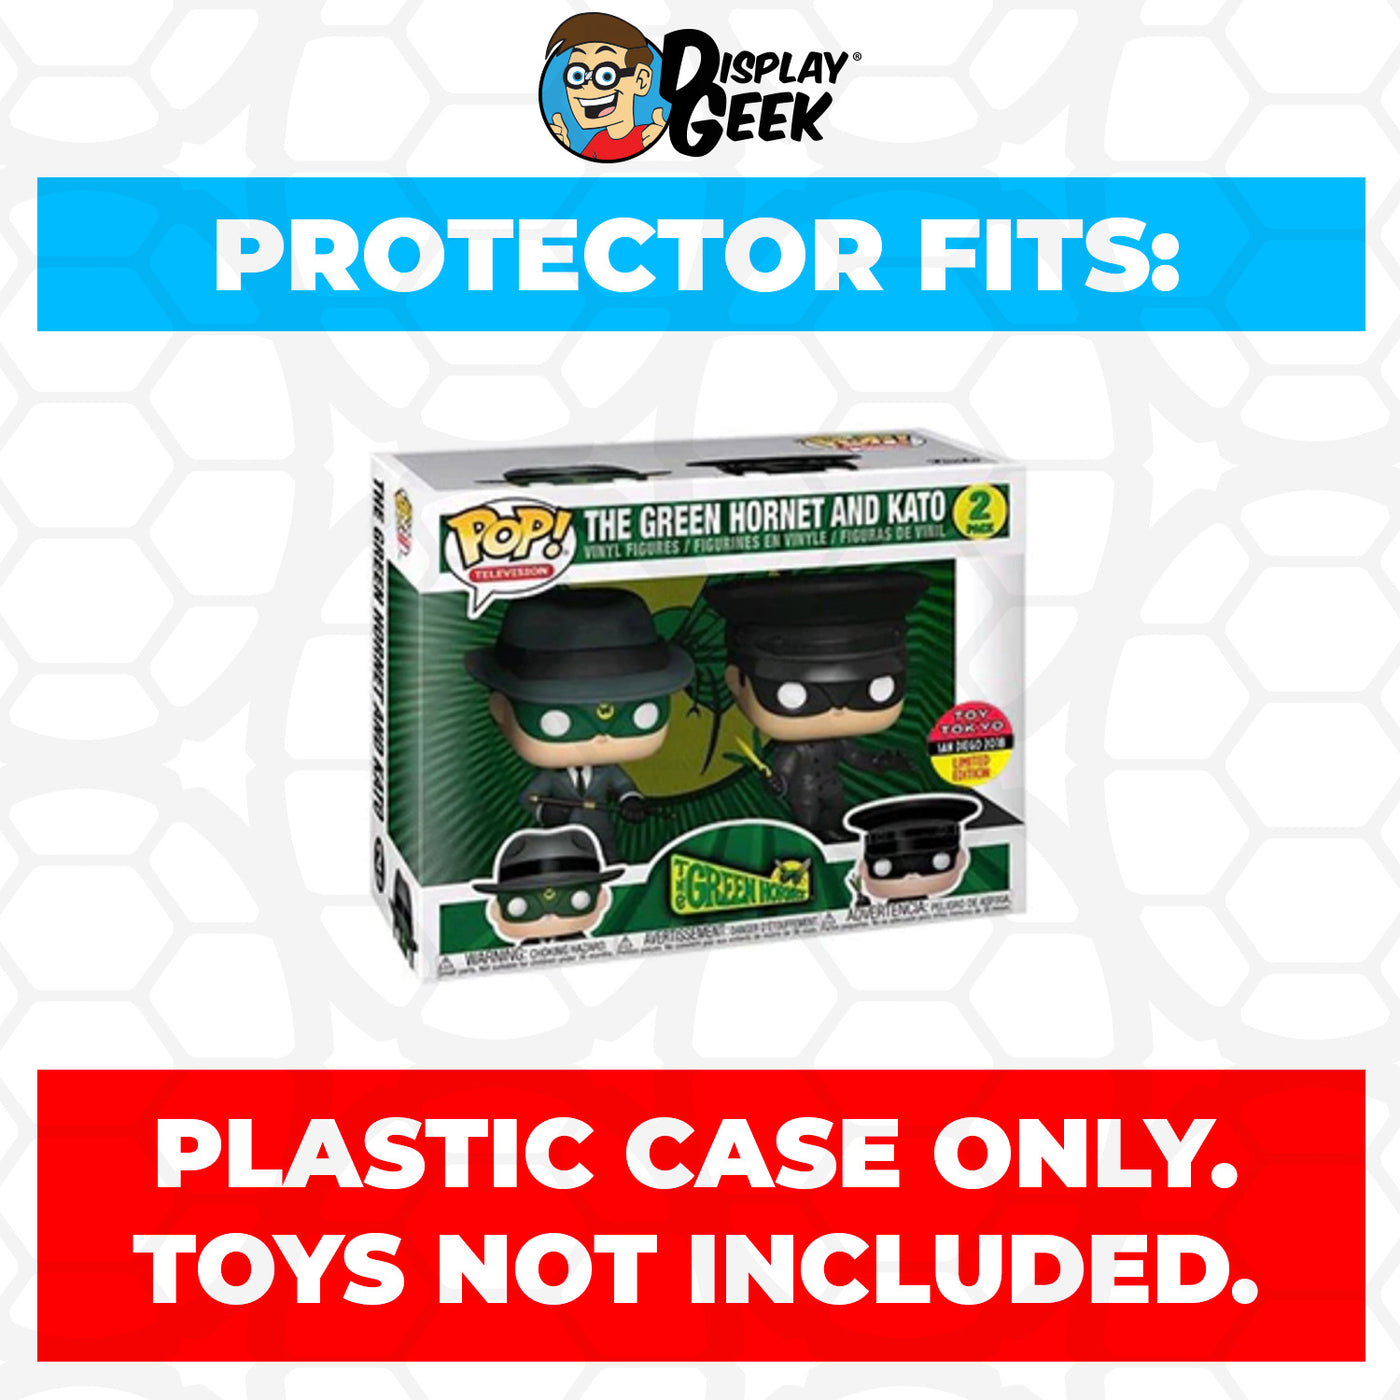 Pop Protector for 2 Pack The Green Hornet & Kato SDCC Funko Pop on The Protector Guide App by Display Geek